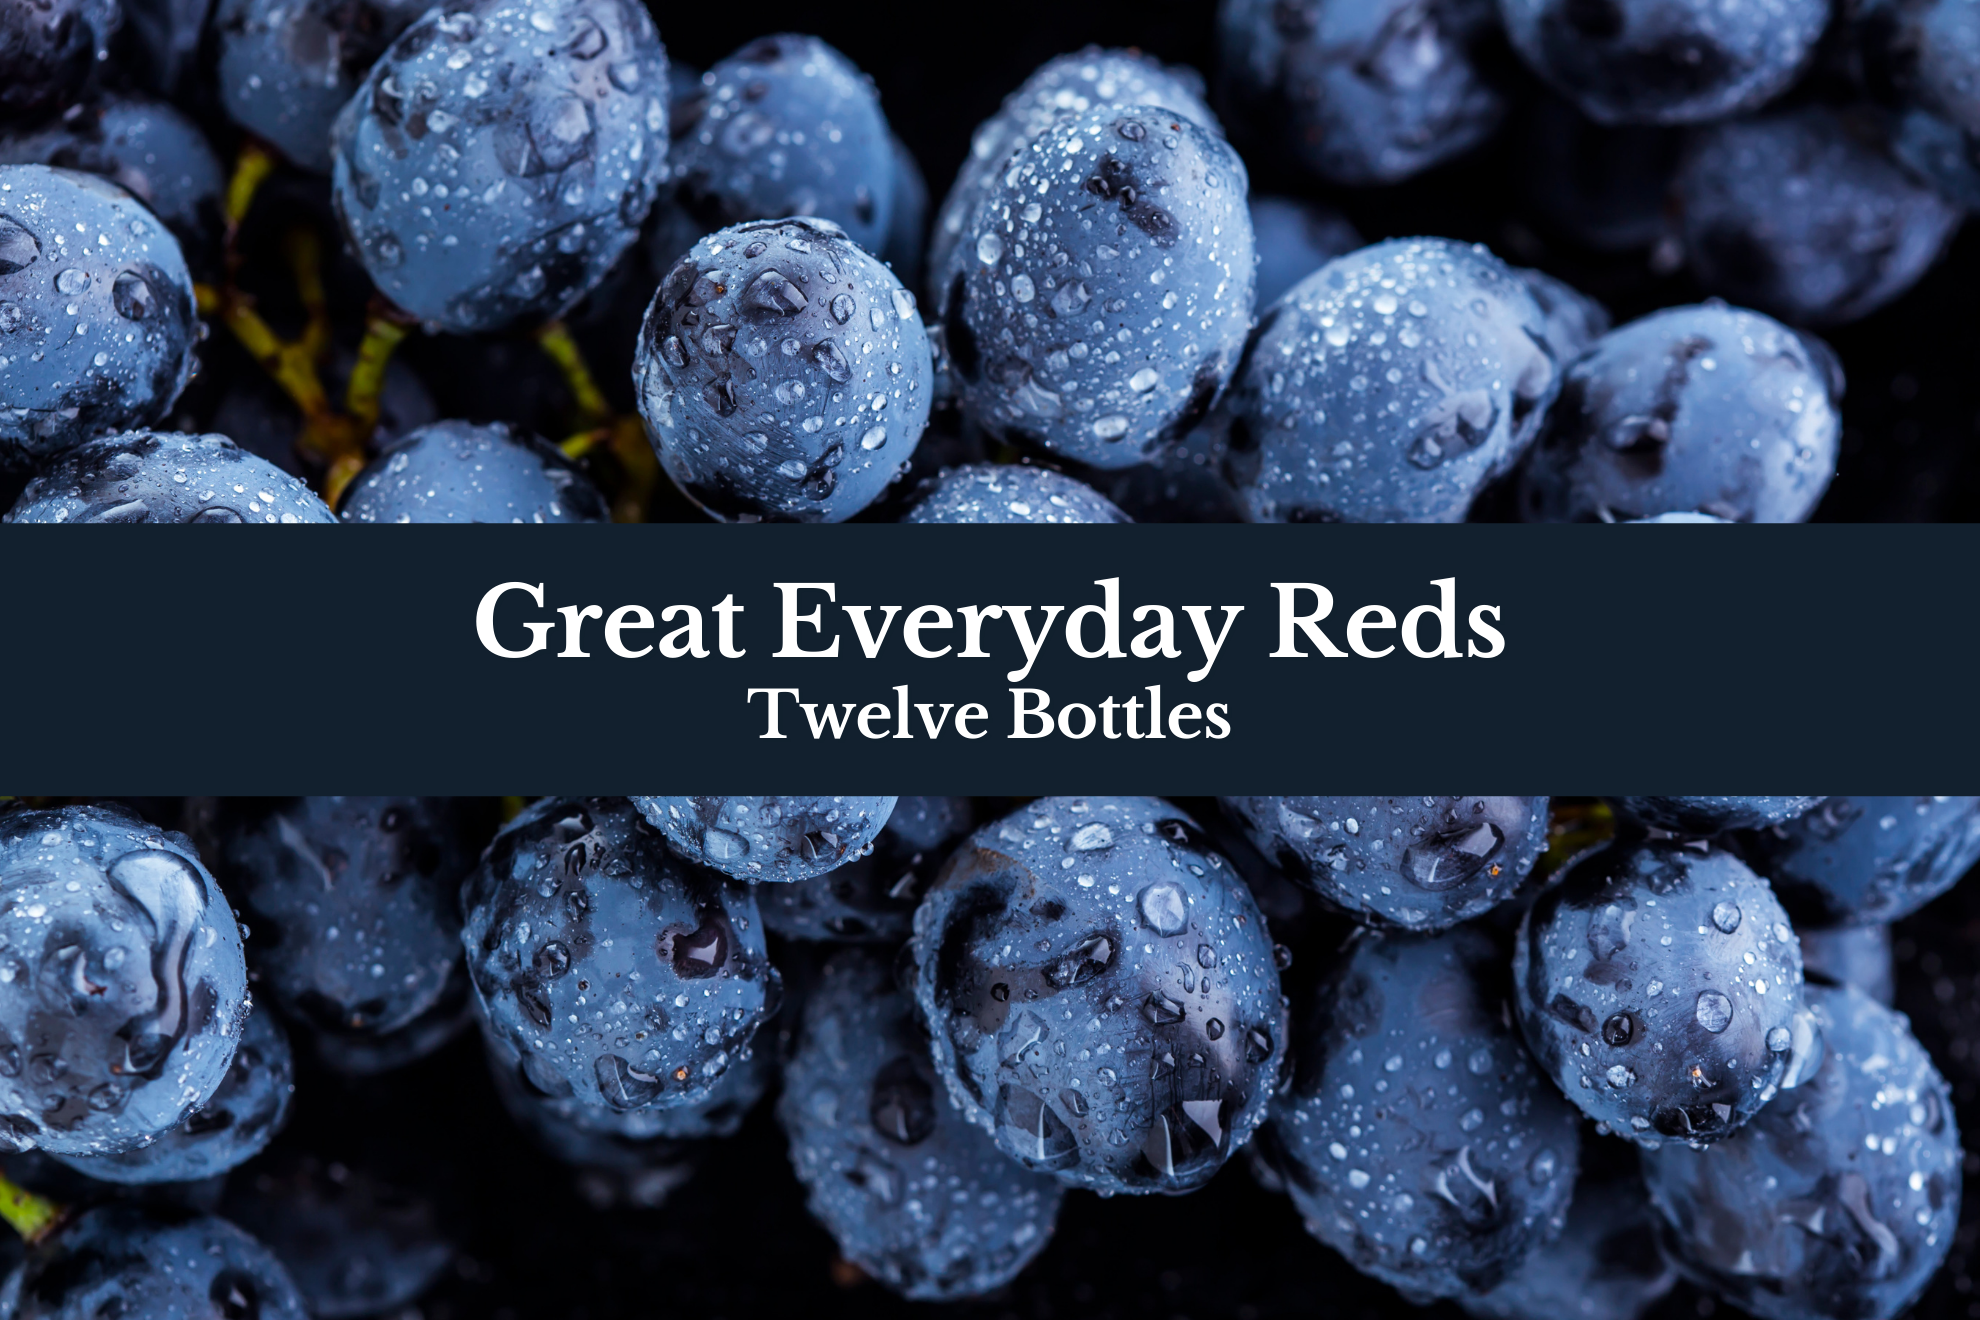 Great Everyday Reds 12